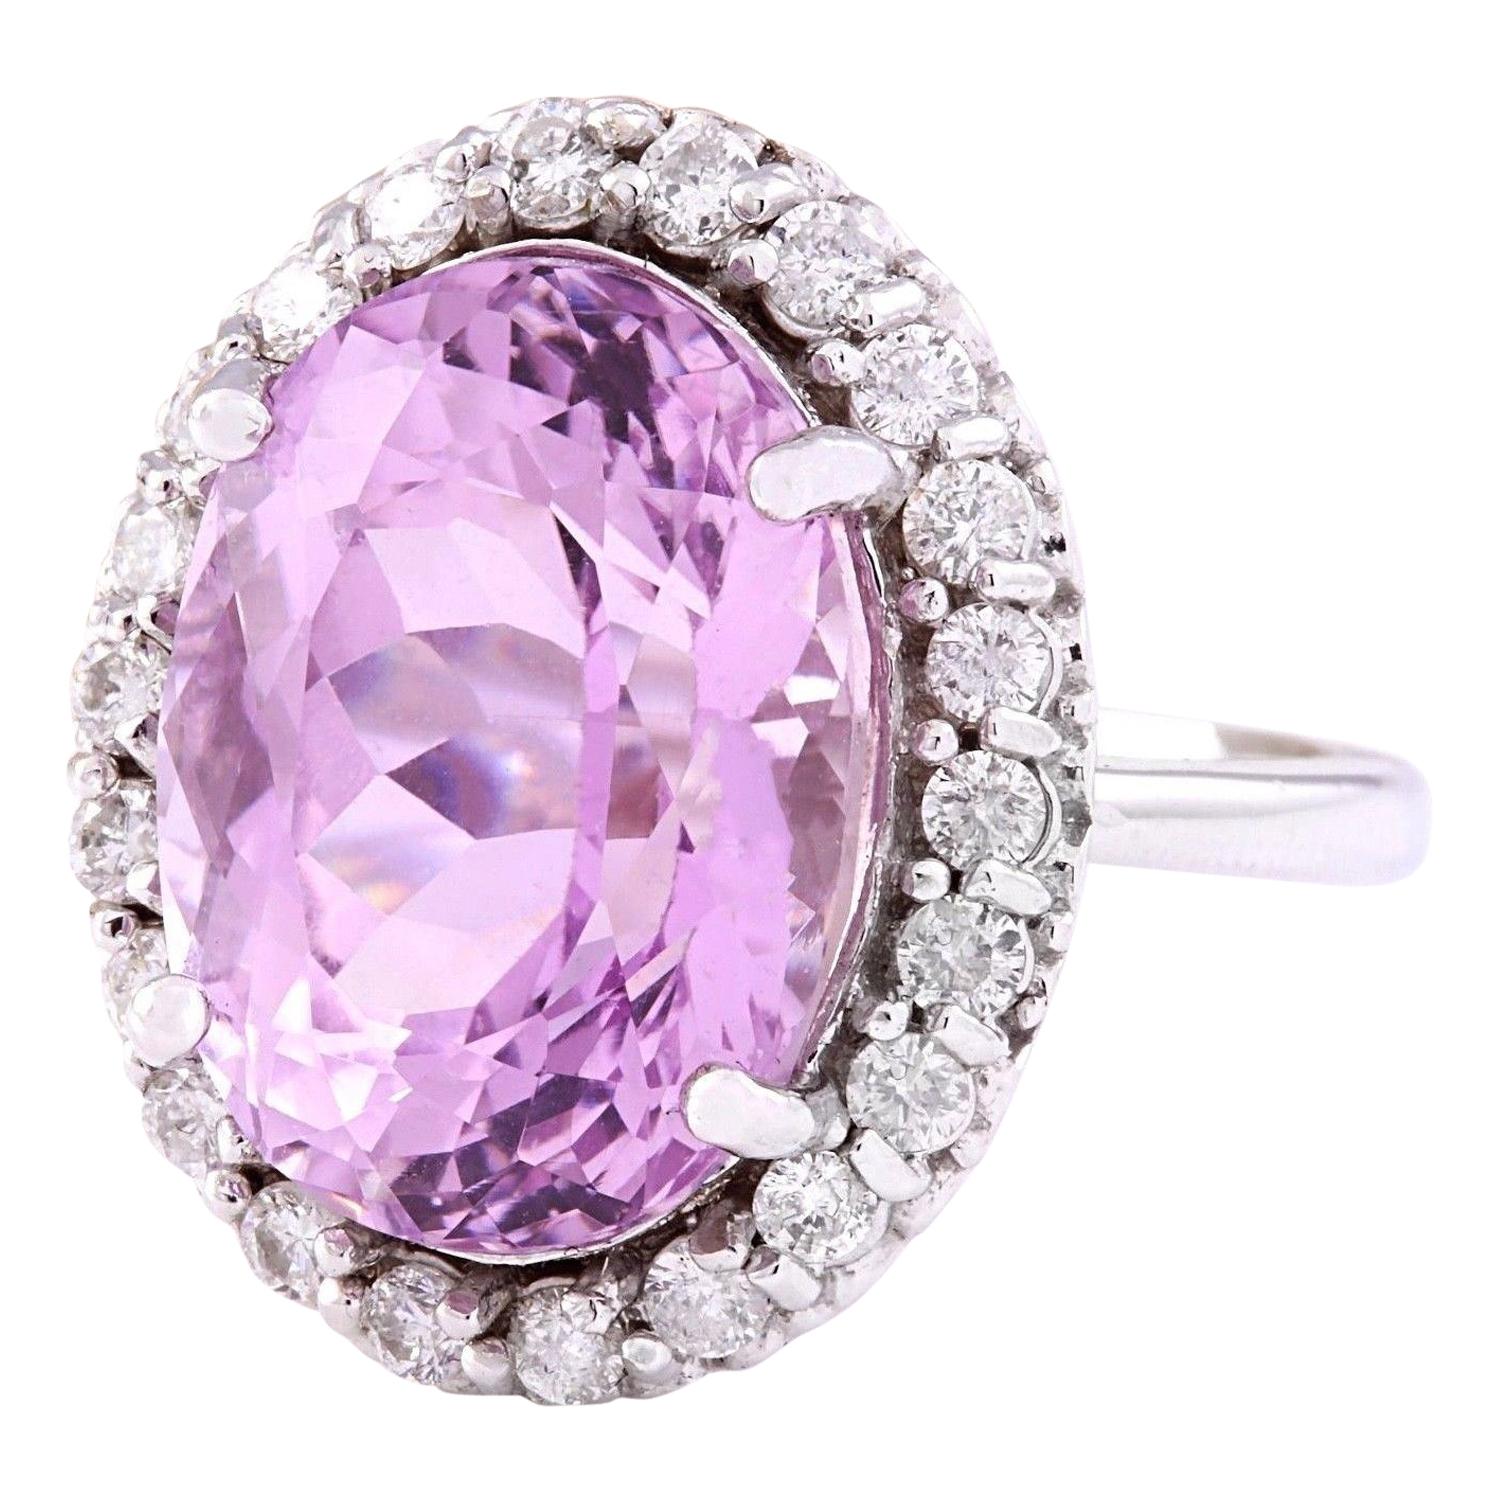 15.02 Carat Natural Kunzite 14K Solid White Gold Diamond Ring
 Item Type: Ring
 Item Style: Cocktail
 Material: 14K White Gold
 Mainstone: Kunzite
 Stone Color: Pink
 Stone Weight: 14.02 Carat
 Stone Shape: Oval
 Stone Quantity: 1
 Stone Dimensions: